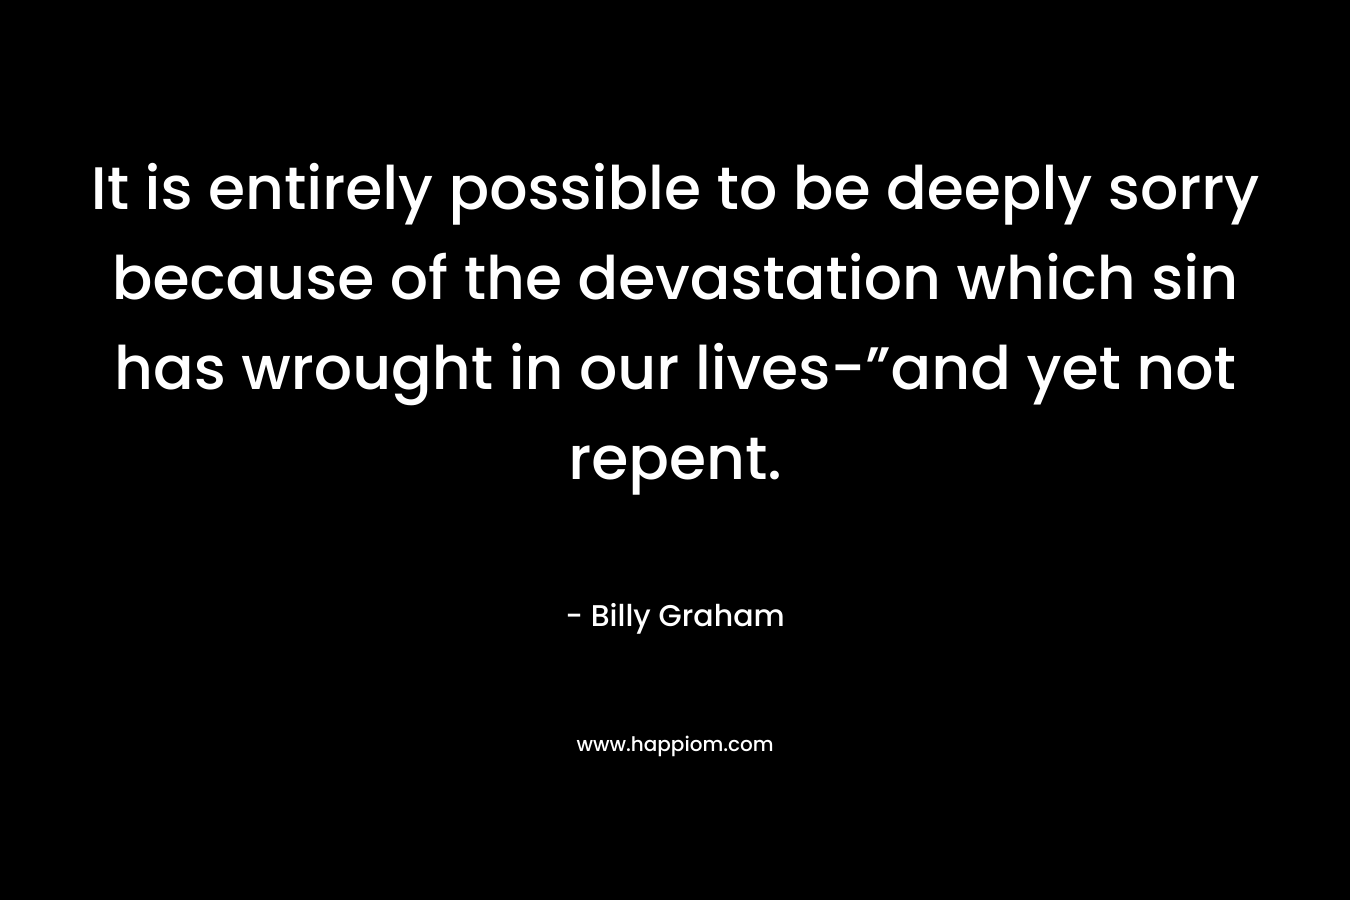 It is entirely possible to be deeply sorry because of the devastation which sin has wrought in our lives-”and yet not repent. – Billy Graham